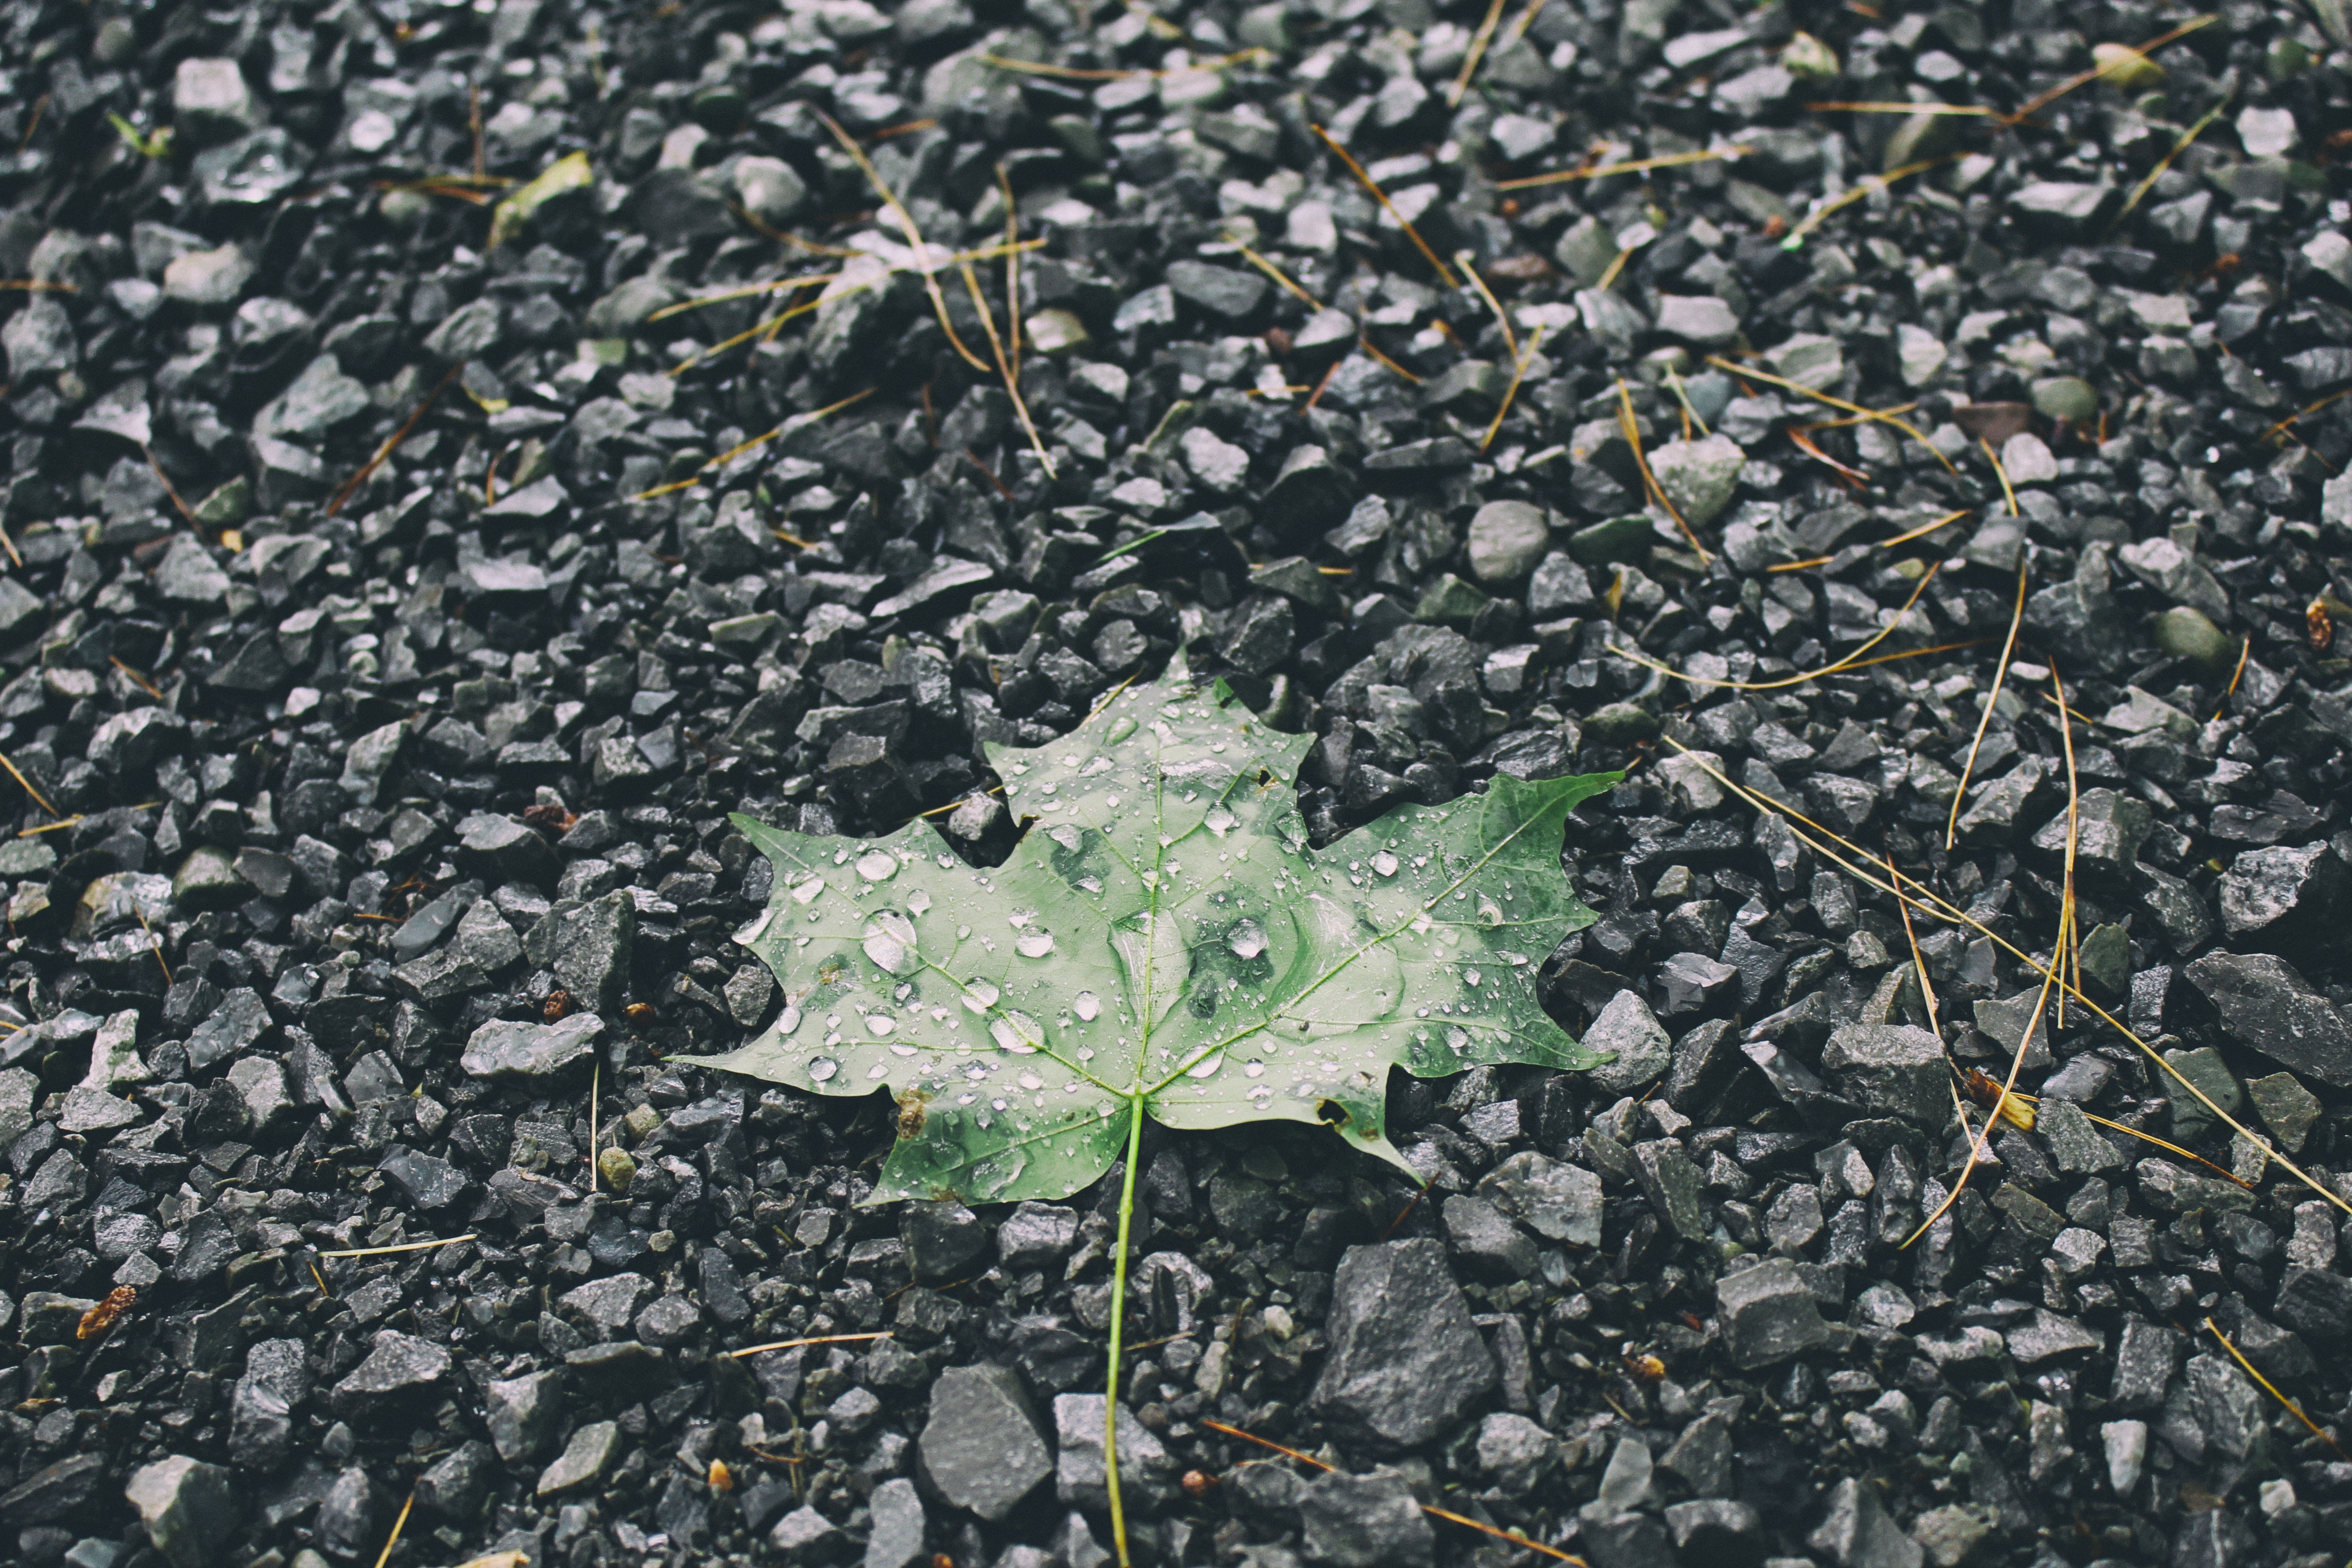 Wallpaper for mobile devices nature, leaf, stones, drops